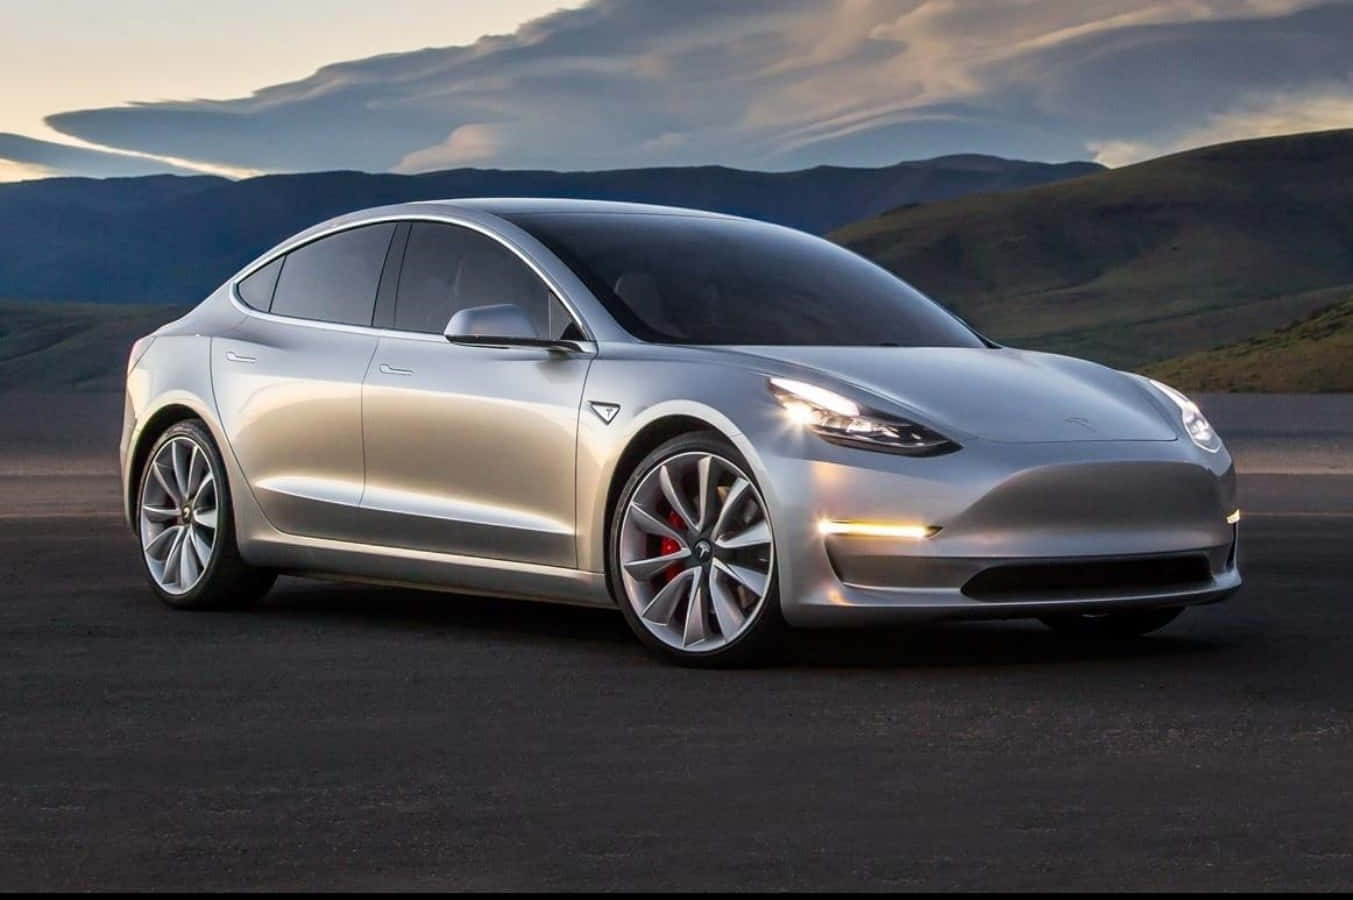 "Introducing the Future of Electric: Tesla Model 3"